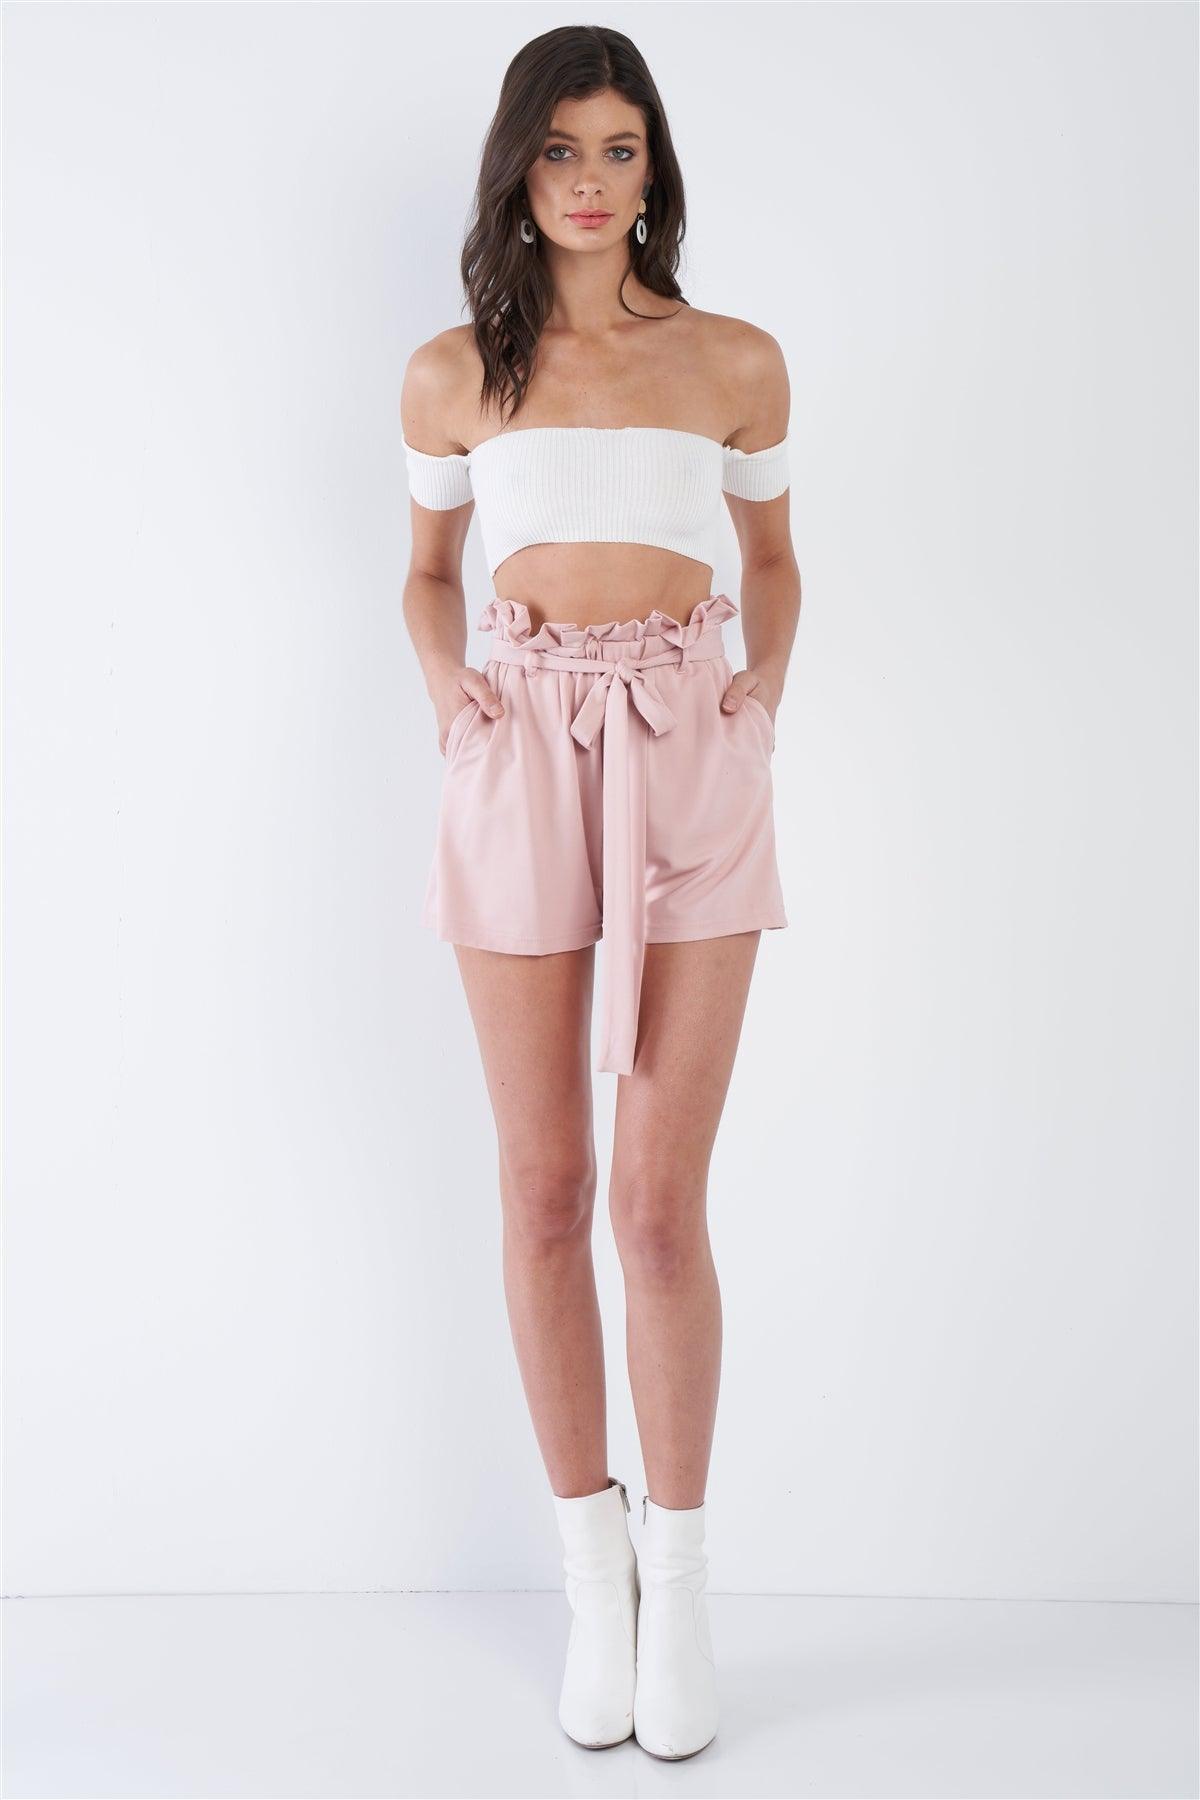 Pink High Waist Frill Trim Casual Office Chic Shorts /3-2-1